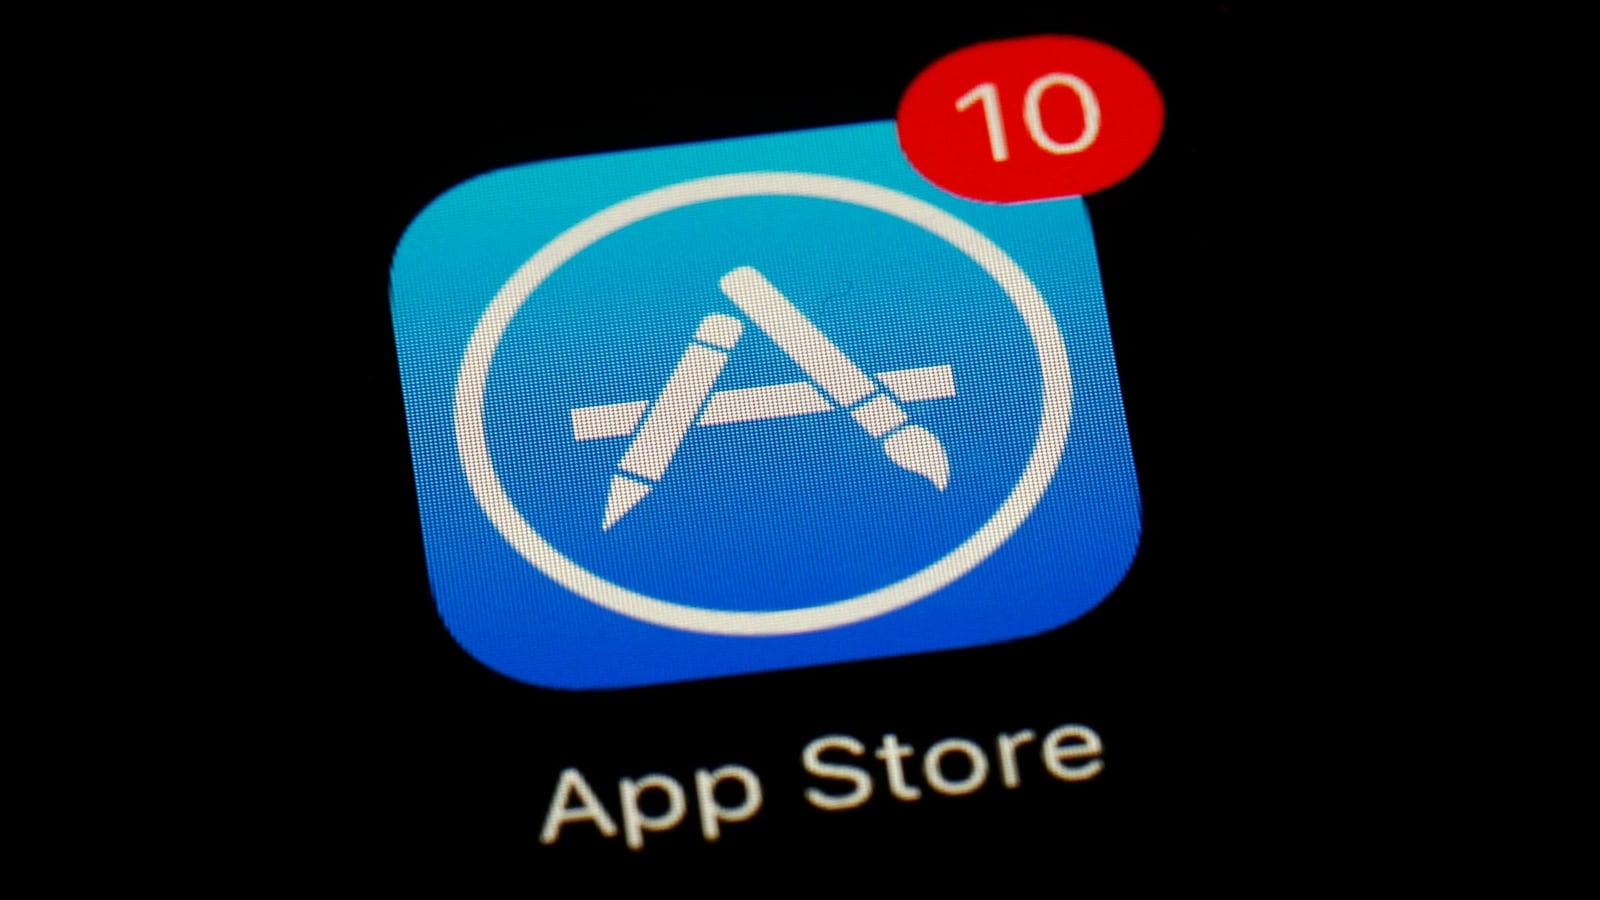 EU hails 'change' as Apple App Store opens to competition